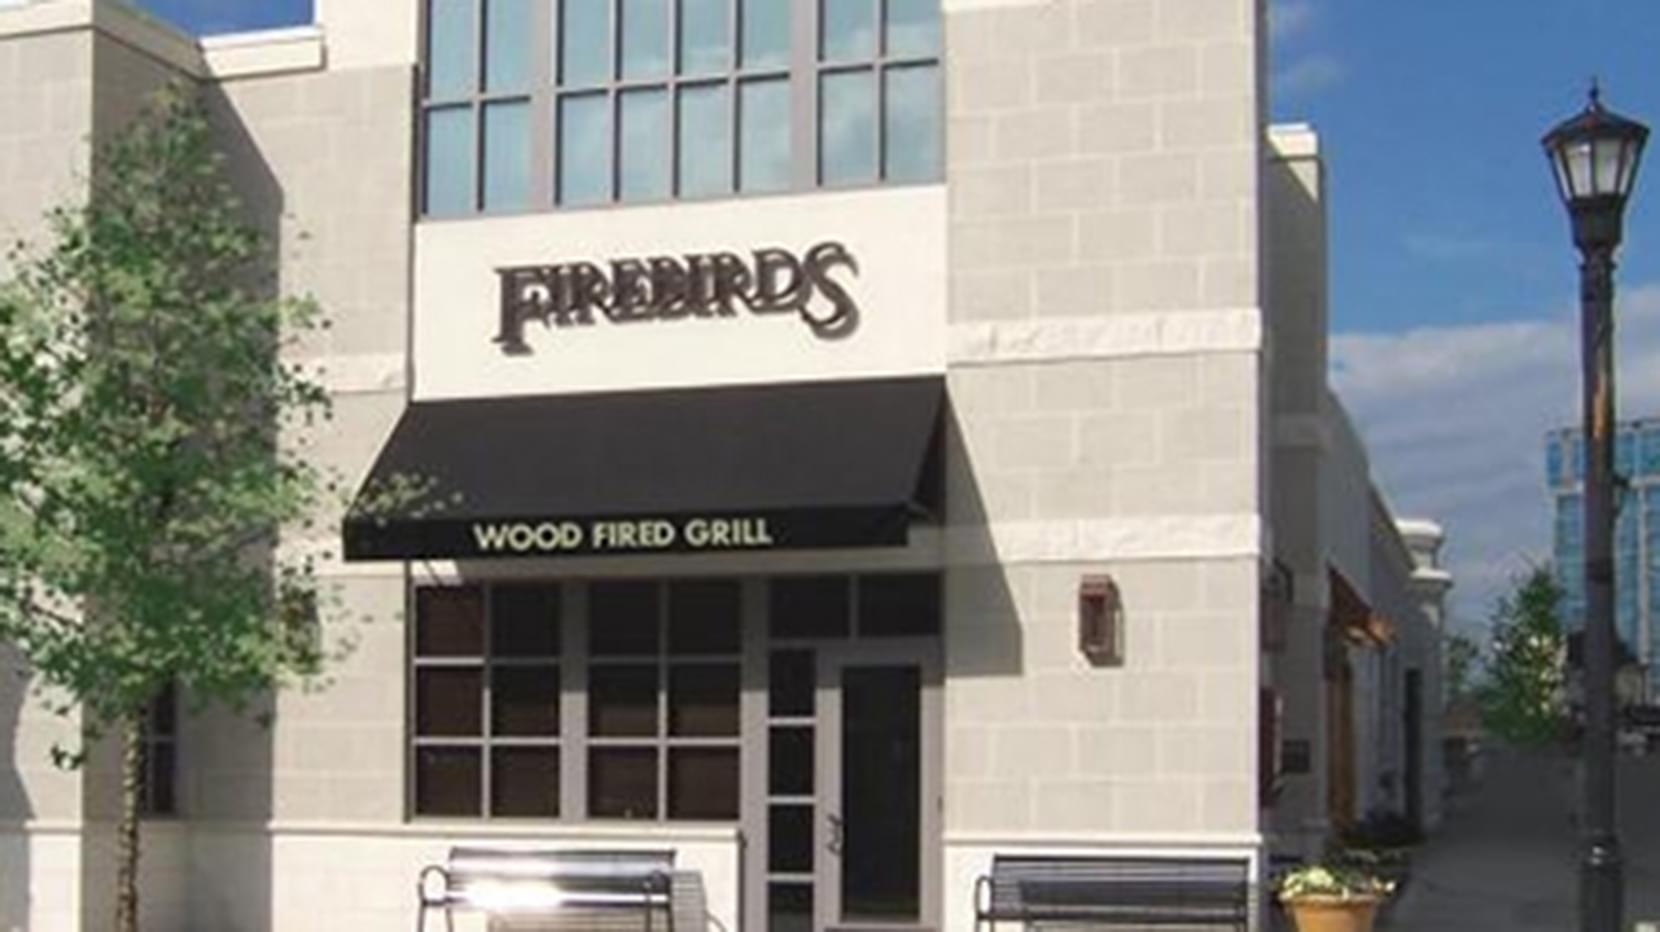 Exterior of Firebirds Wood Fired Grill in Raleigh, NC